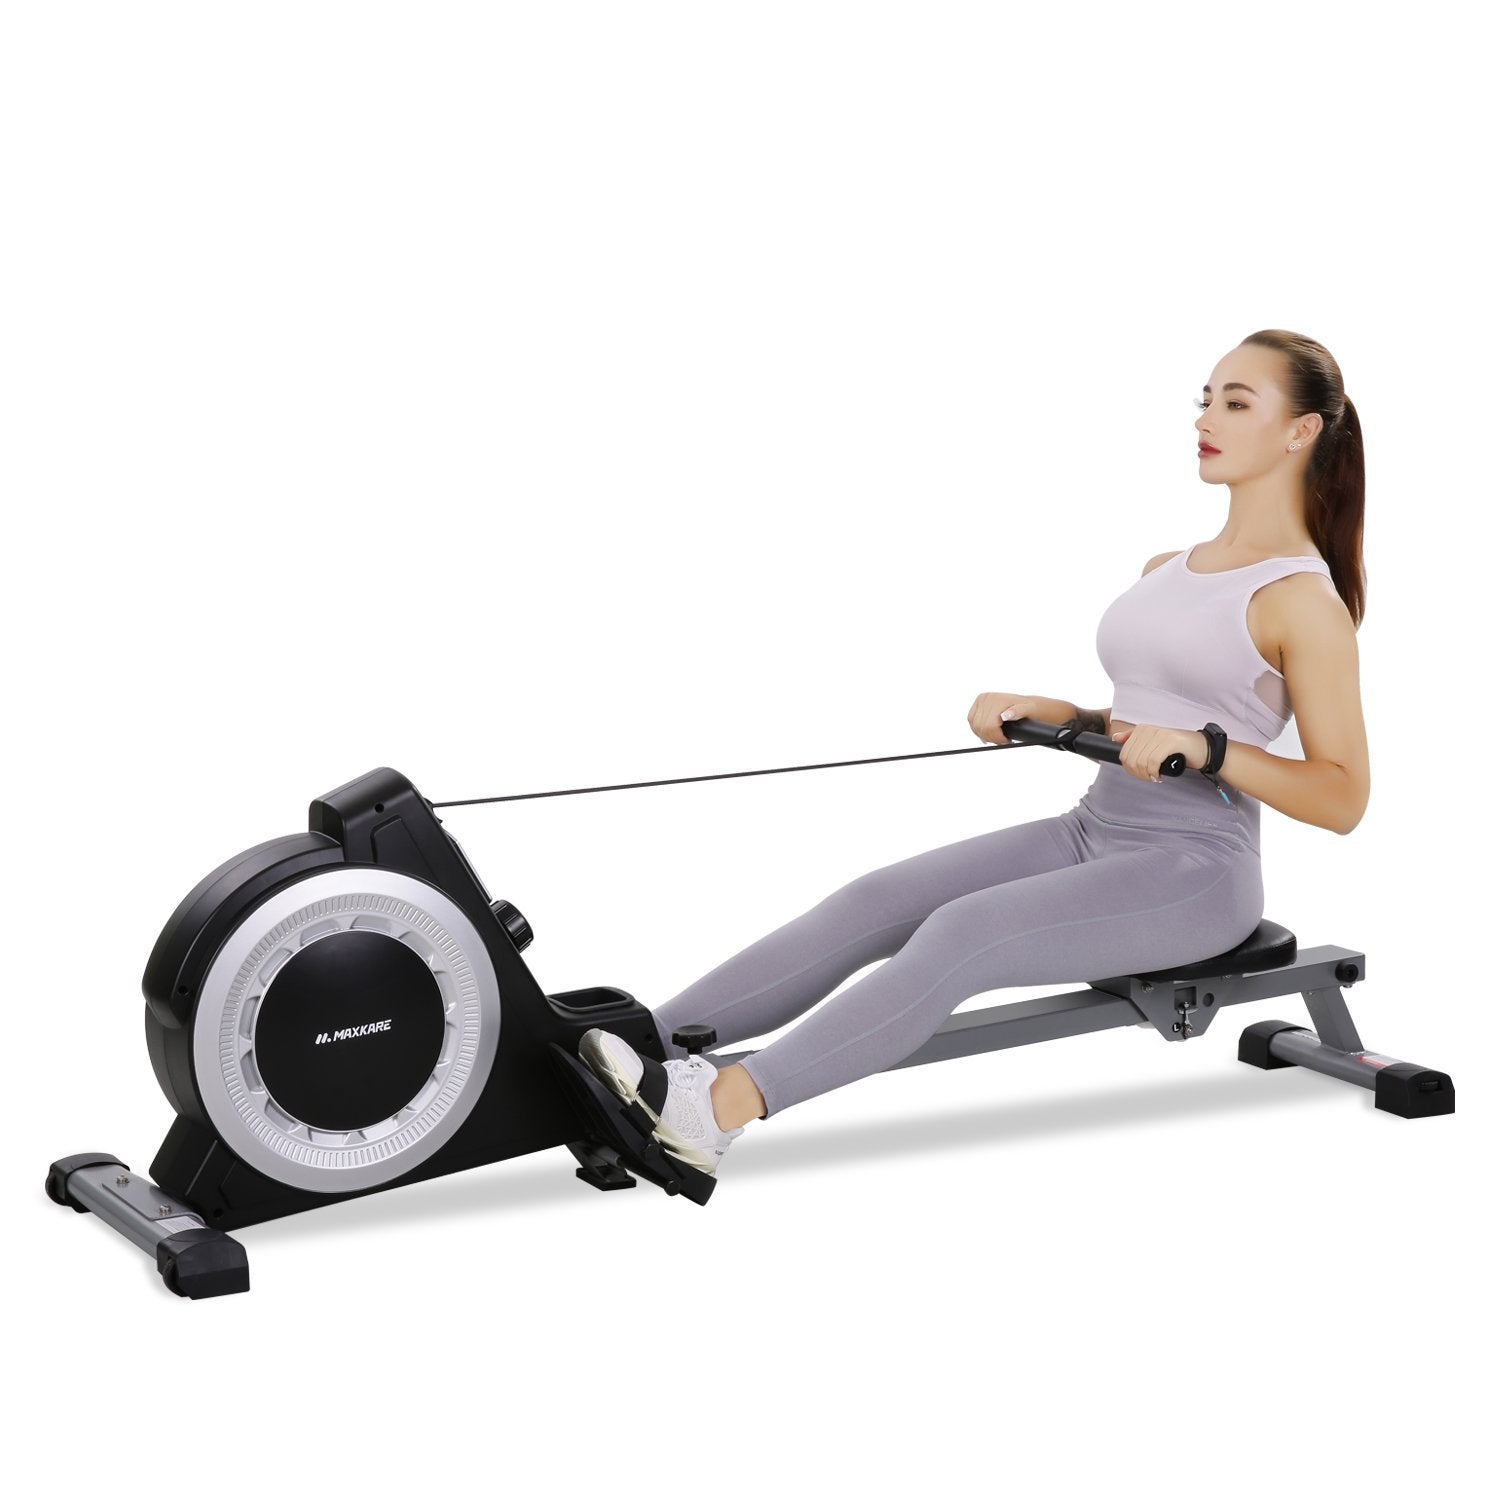 Load image into Gallery viewer, MaxKare Magnetic Rowing Machine Indoor Use - NAIPO
